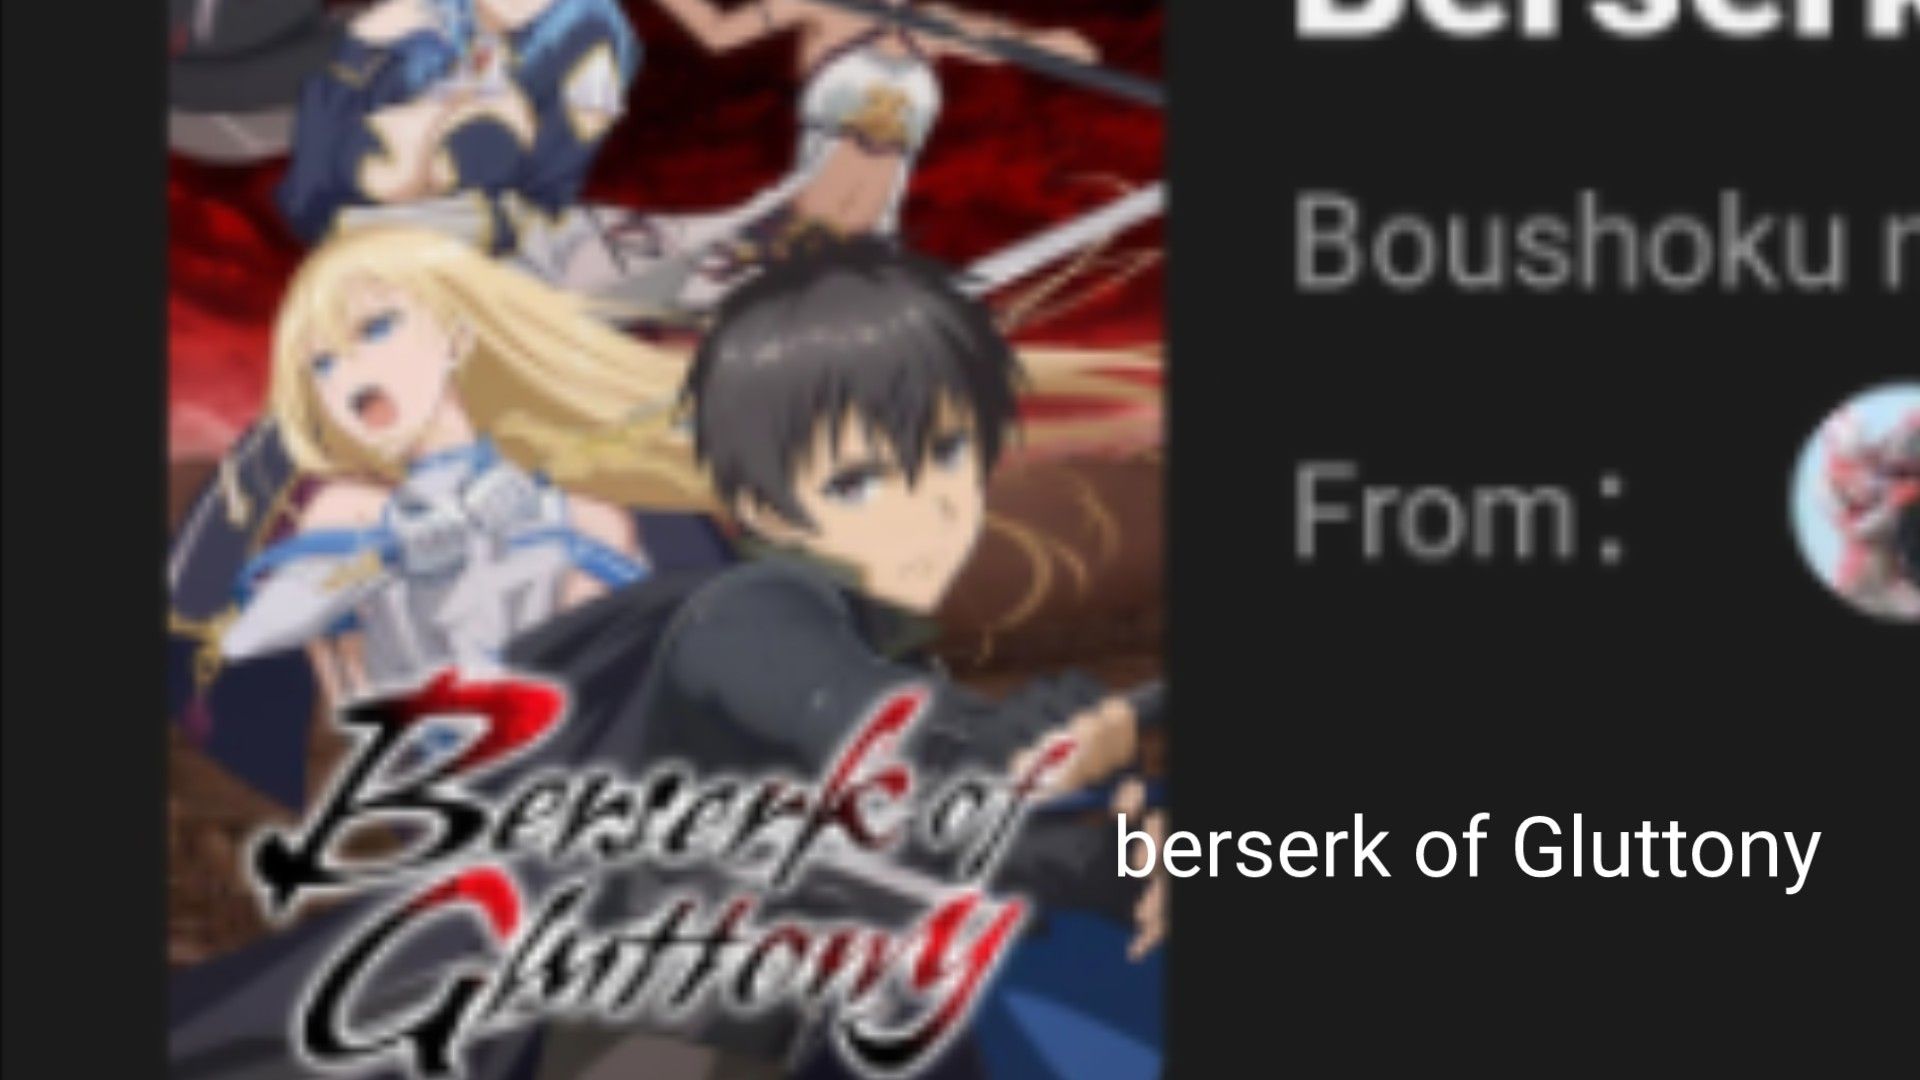 When Will Berserk of Gluttony Be Dubbed in English?